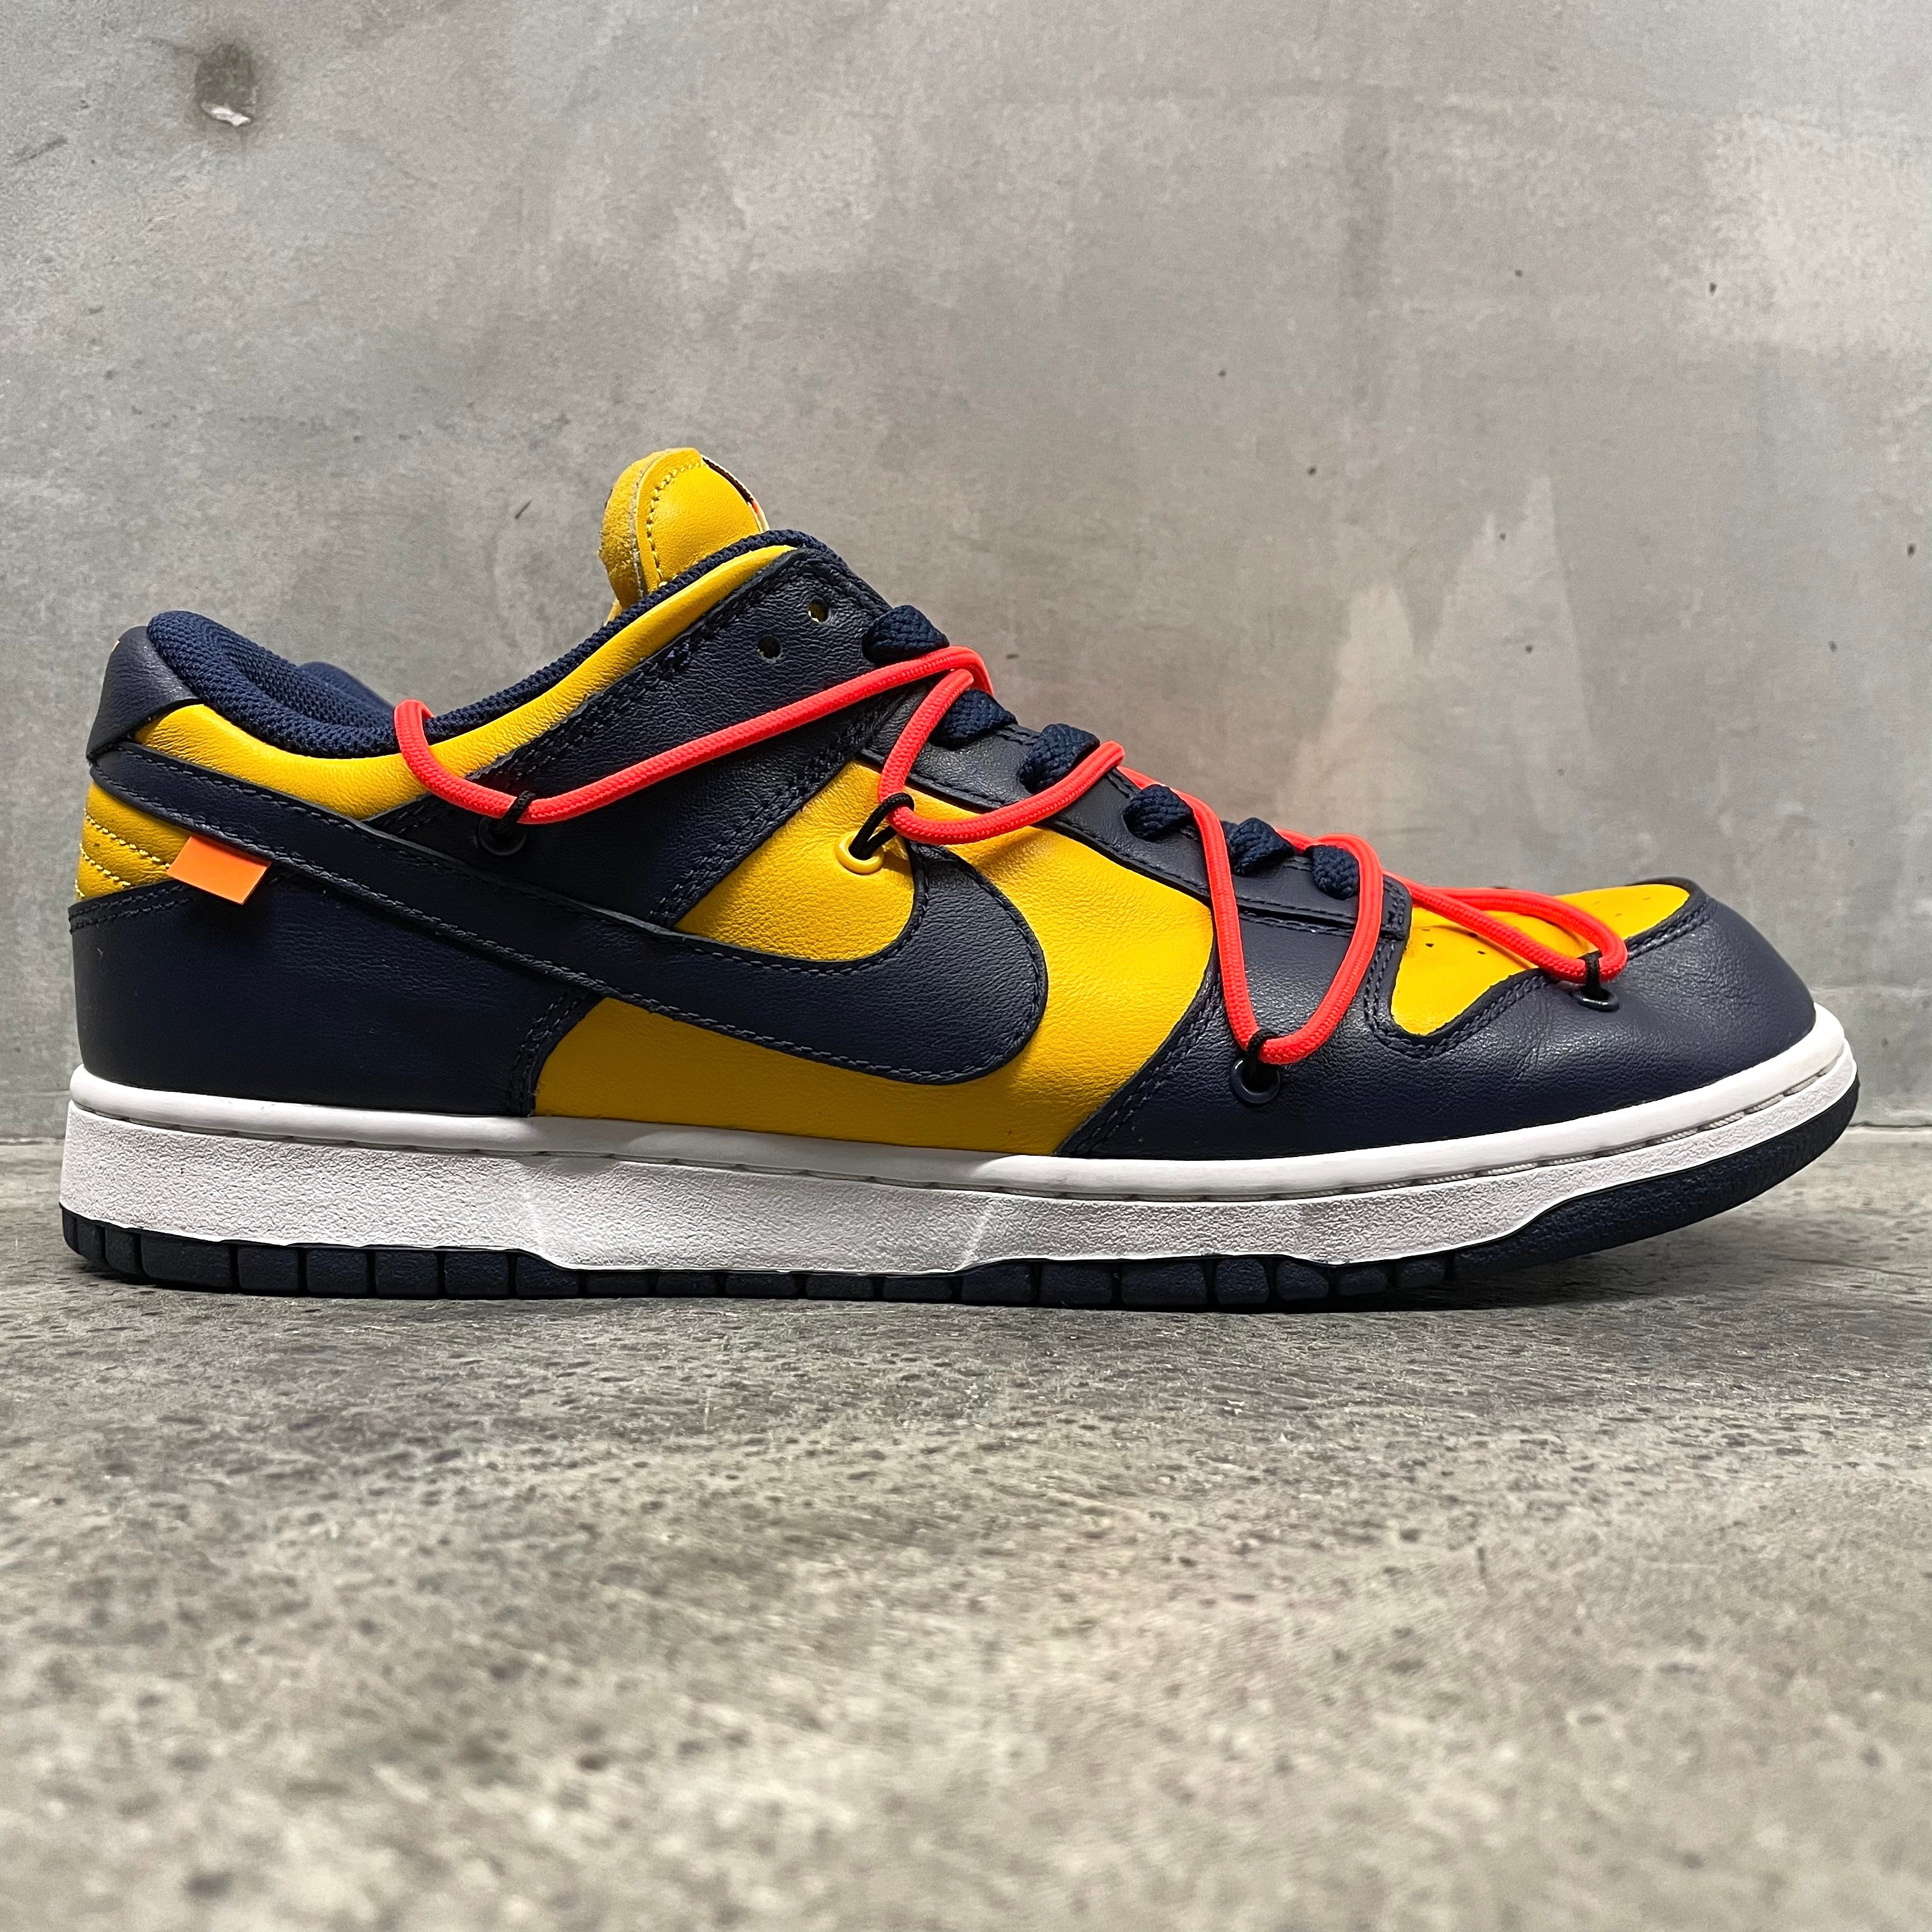 【US12】NIKE DUNK LHTR/OW "Off-White University Gold Midnight Navy" CT0856-700